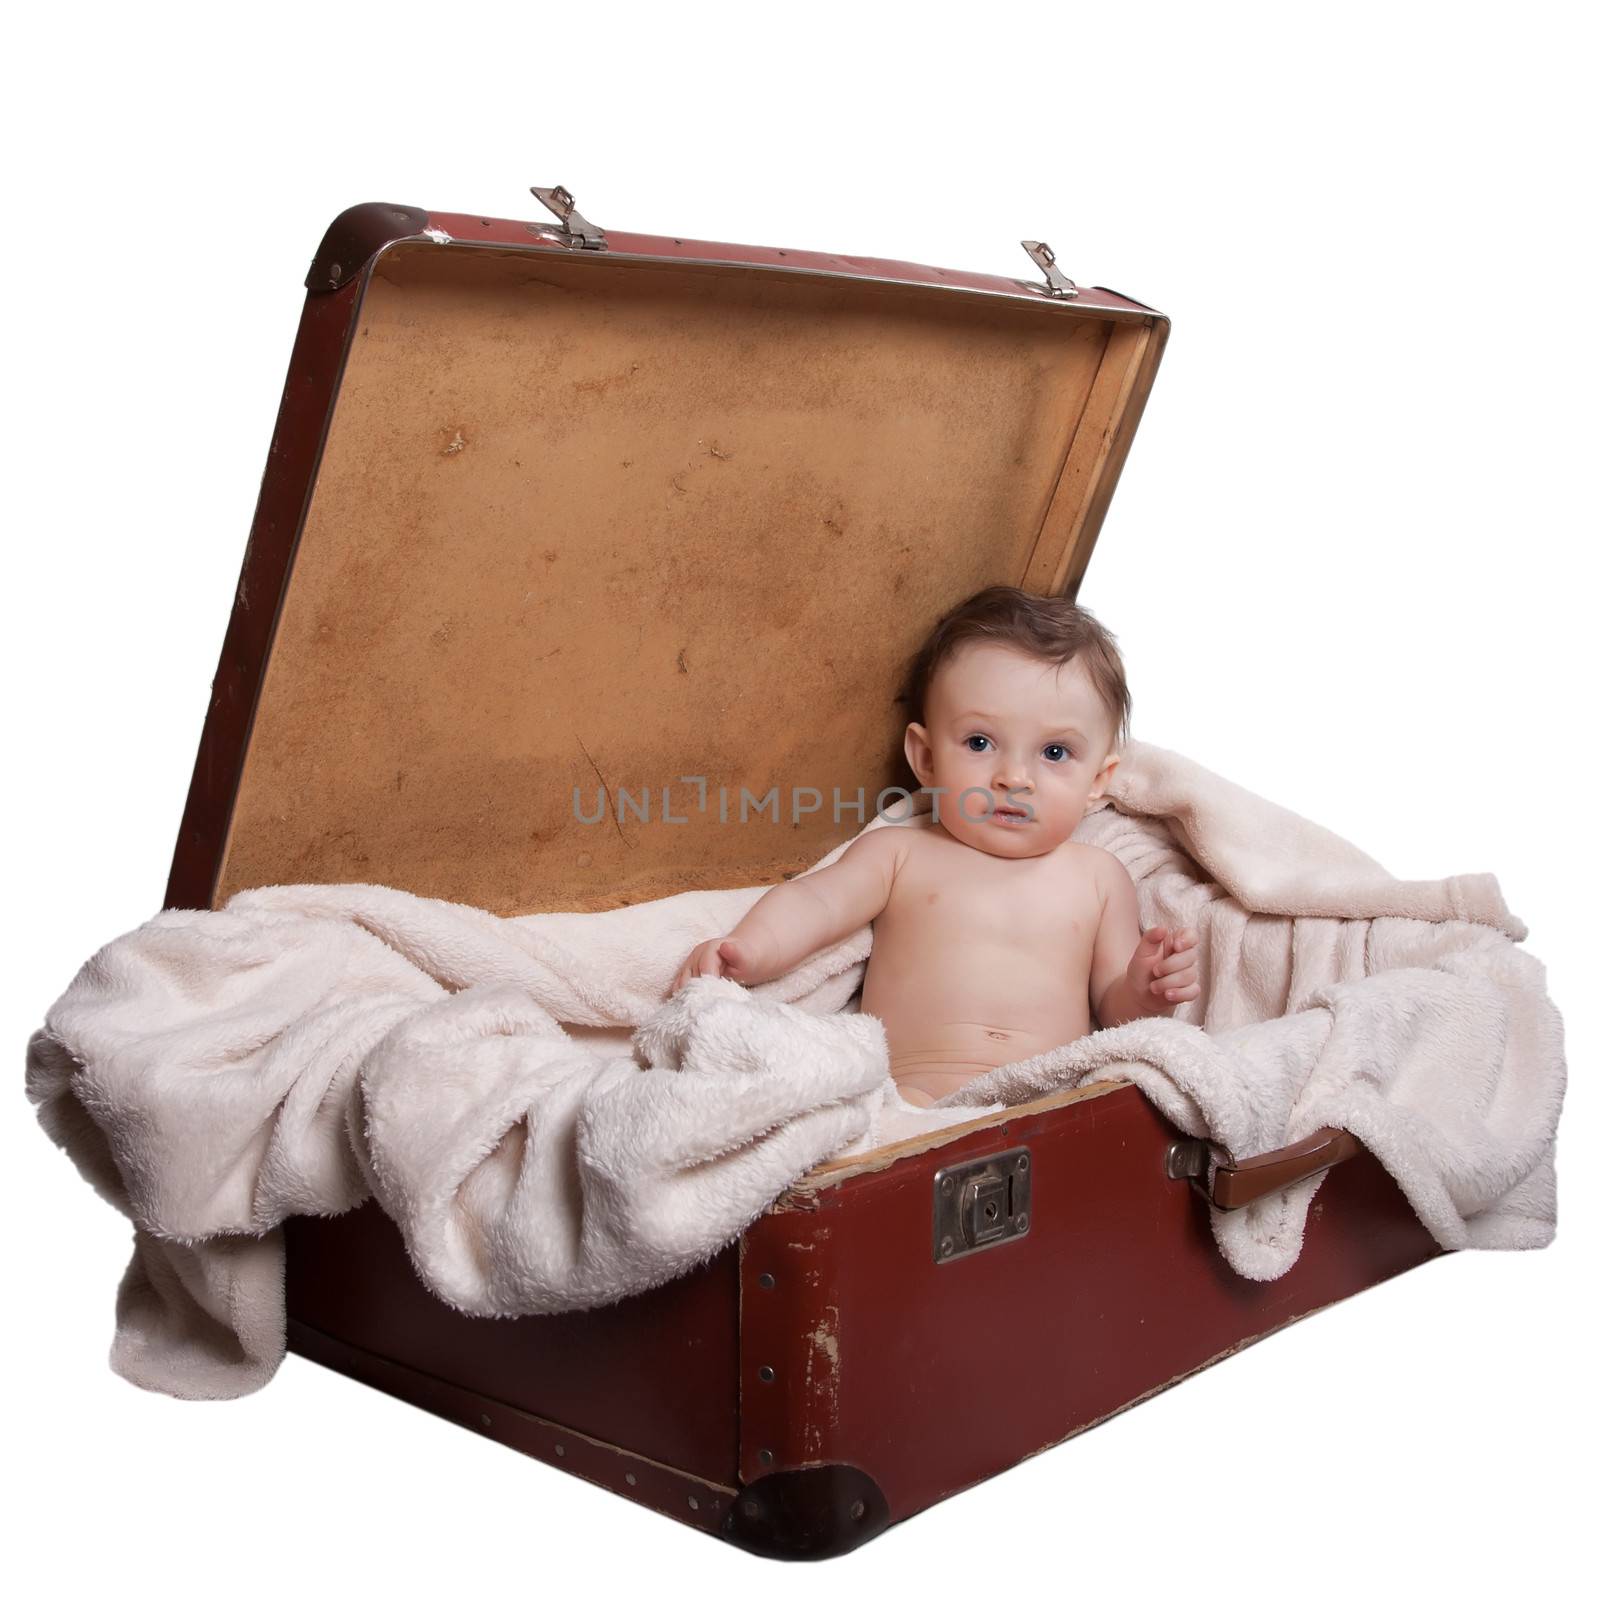 Little baby boy sitting naked on a blanket, in the old suitcases, on a white background